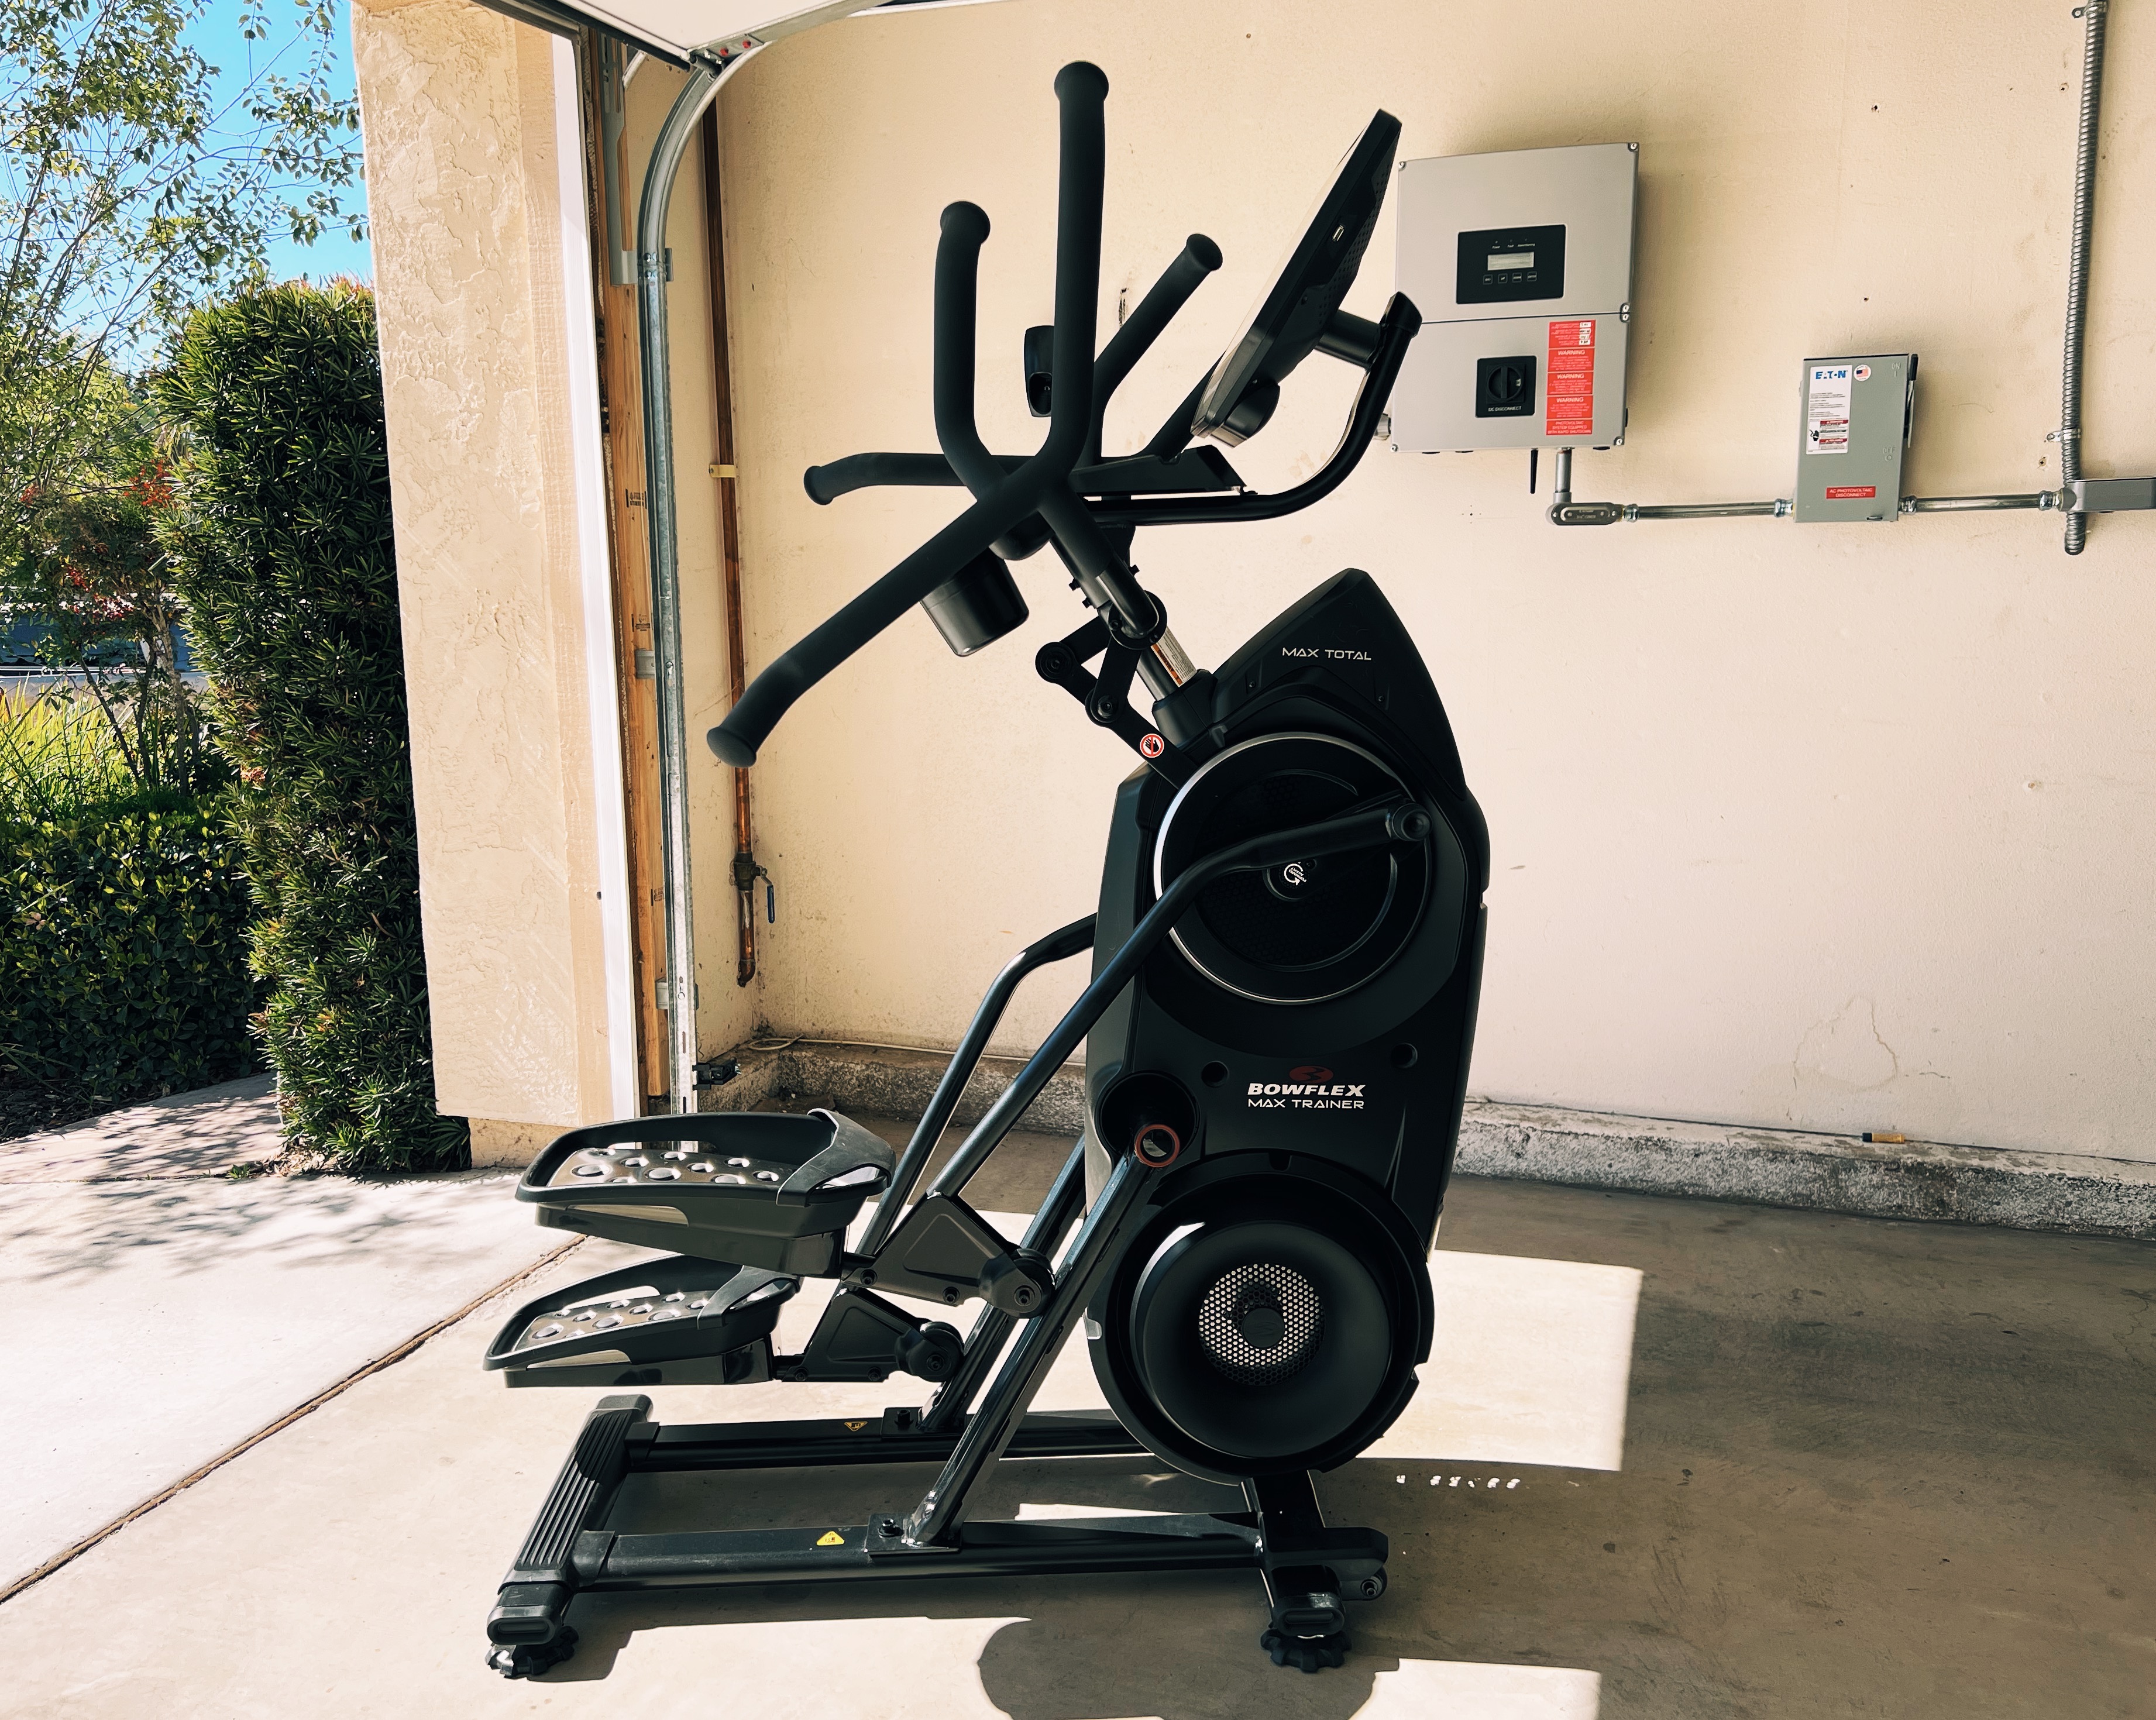 Bowflex Max Total 16 Compact Elliptical Machine Can Do Fitness and Movies